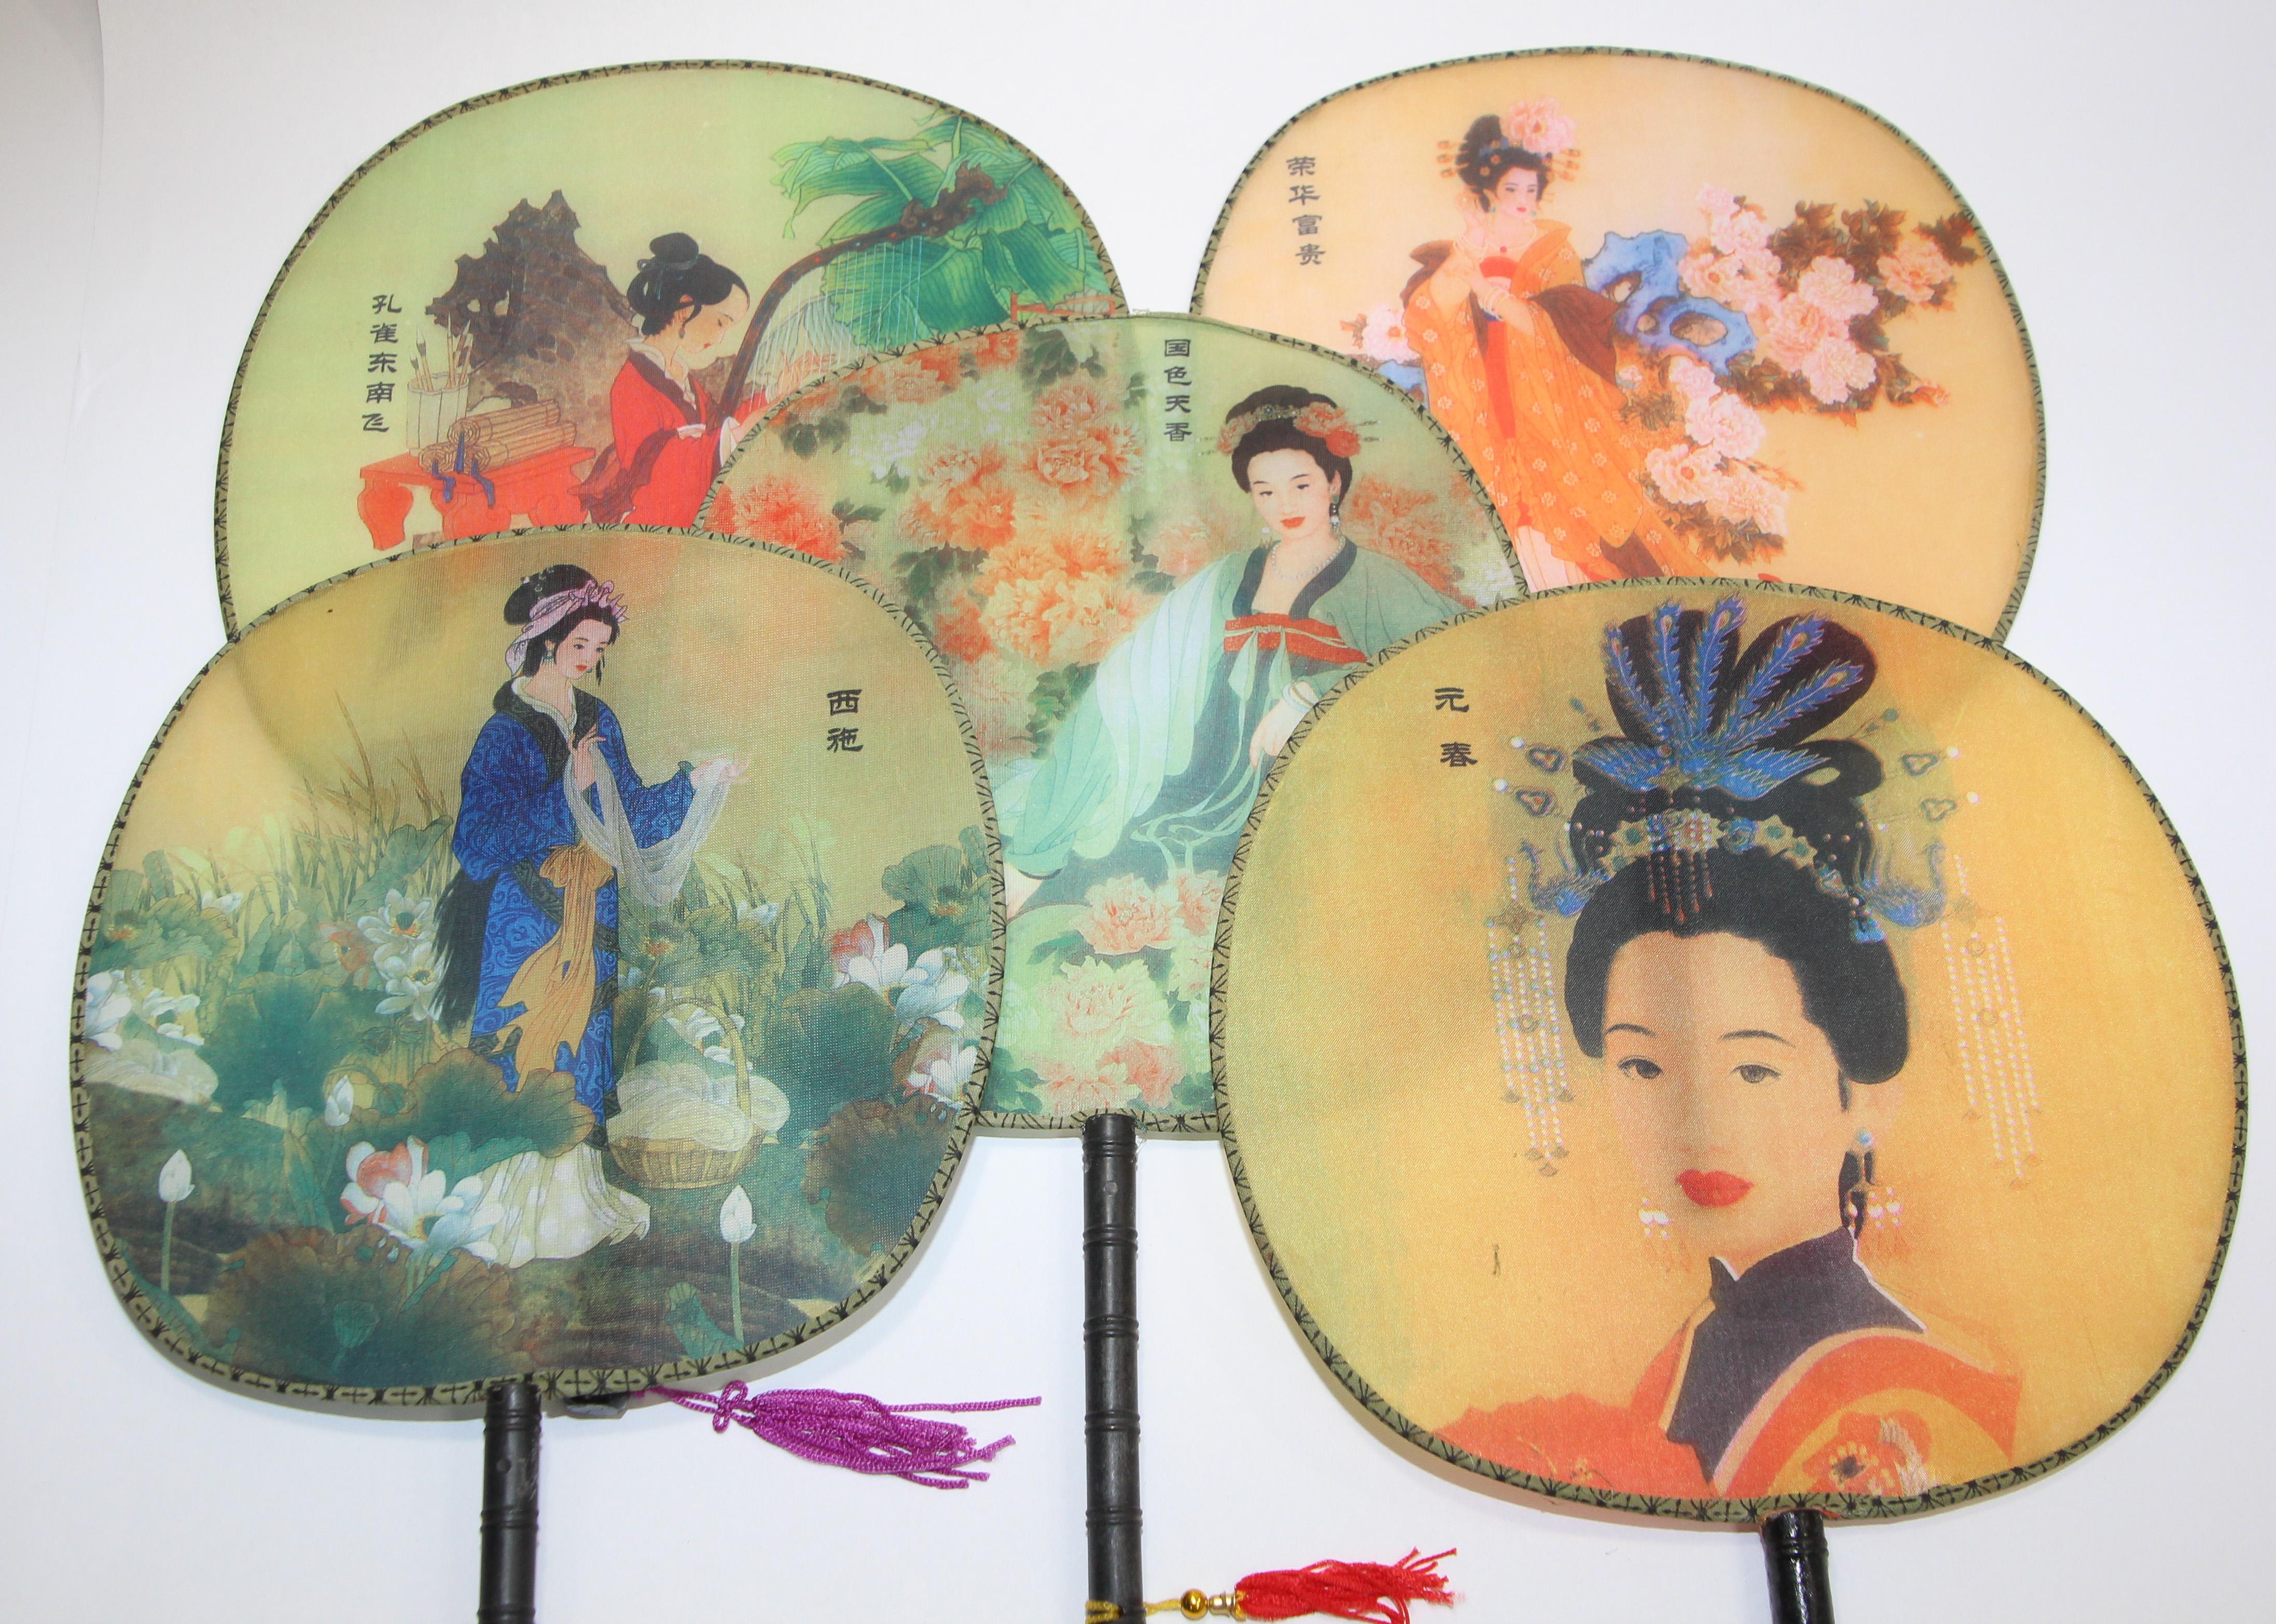 Set of 5 Chinese Silk Round Fans, Hand Fans with Geisha Woman painting.
Vintage Asian hand fans decorated with printed Geisha Women and Chinese landscape.
Chinoiserie silk paddle fans with floral and figures details designs, wooden bamboo handle and